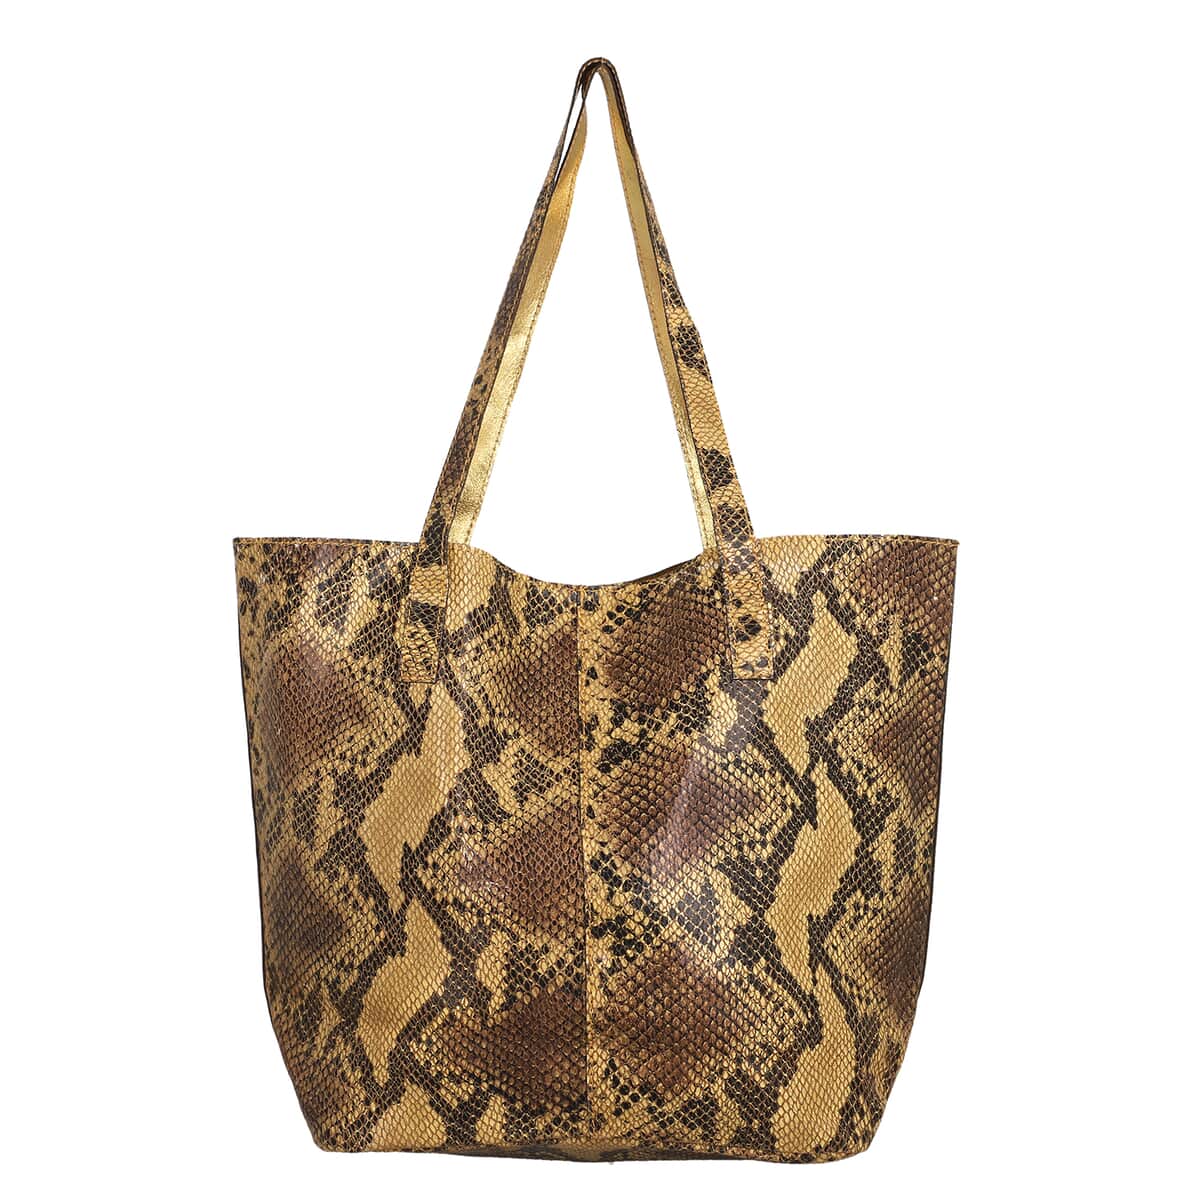 Black and Yellow Snake Foil Print 100% Genuine Leather Tote Bag (14.56"x 3.74" x 8.66") image number 3